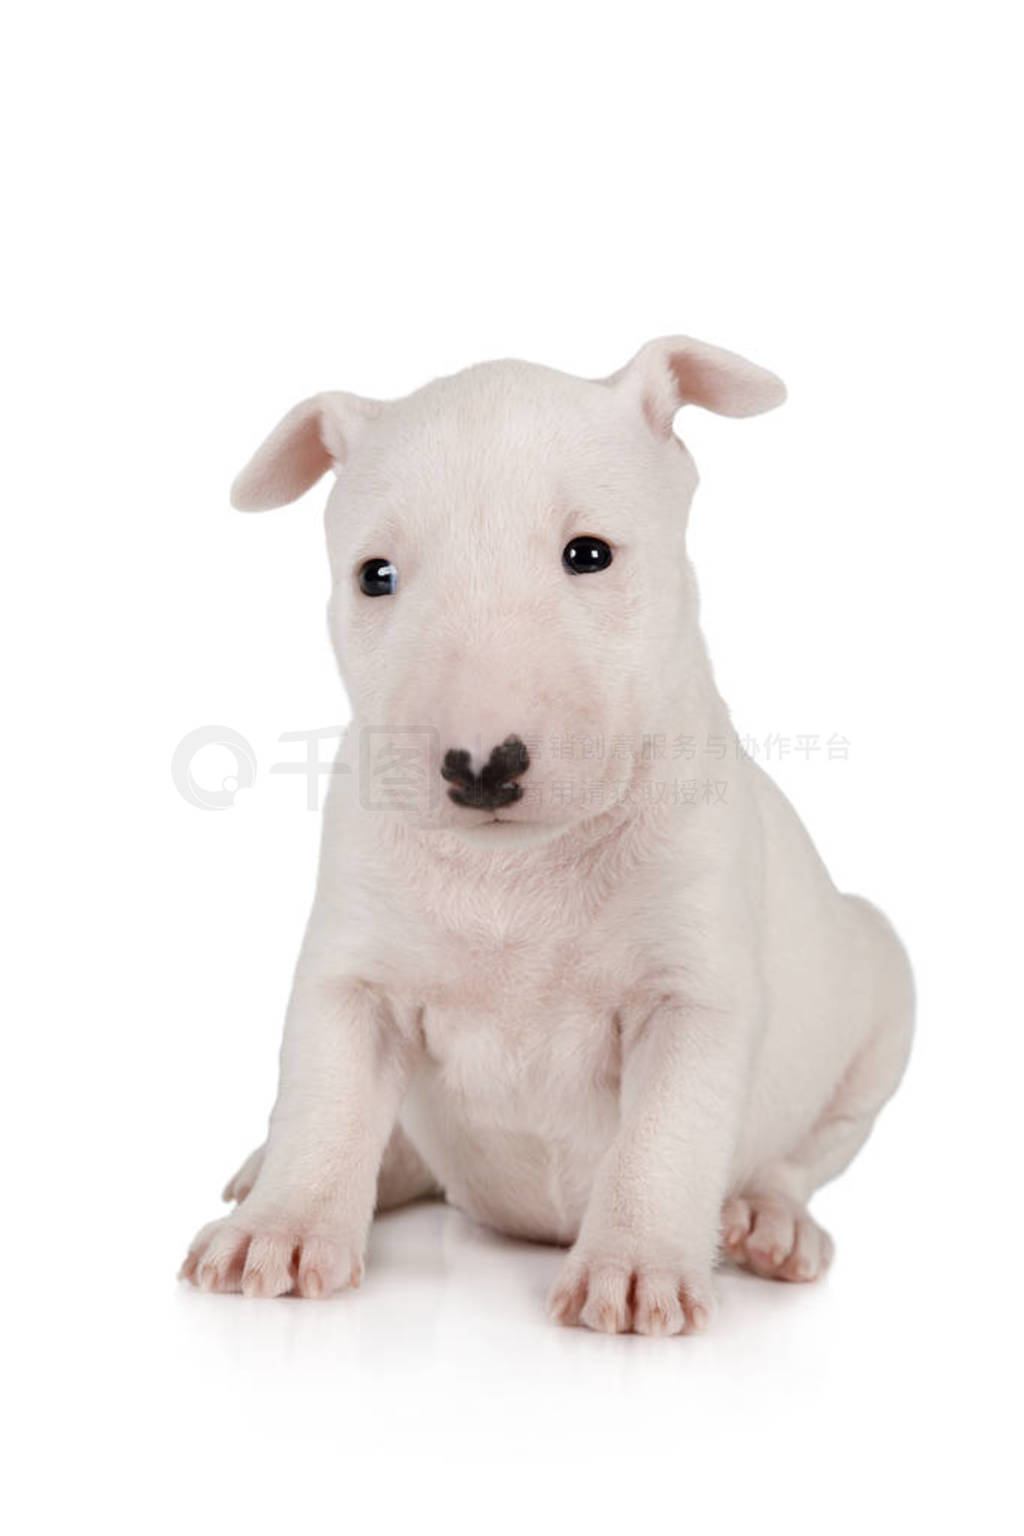 Adorable Miniature Bull Terrier puppy one month old